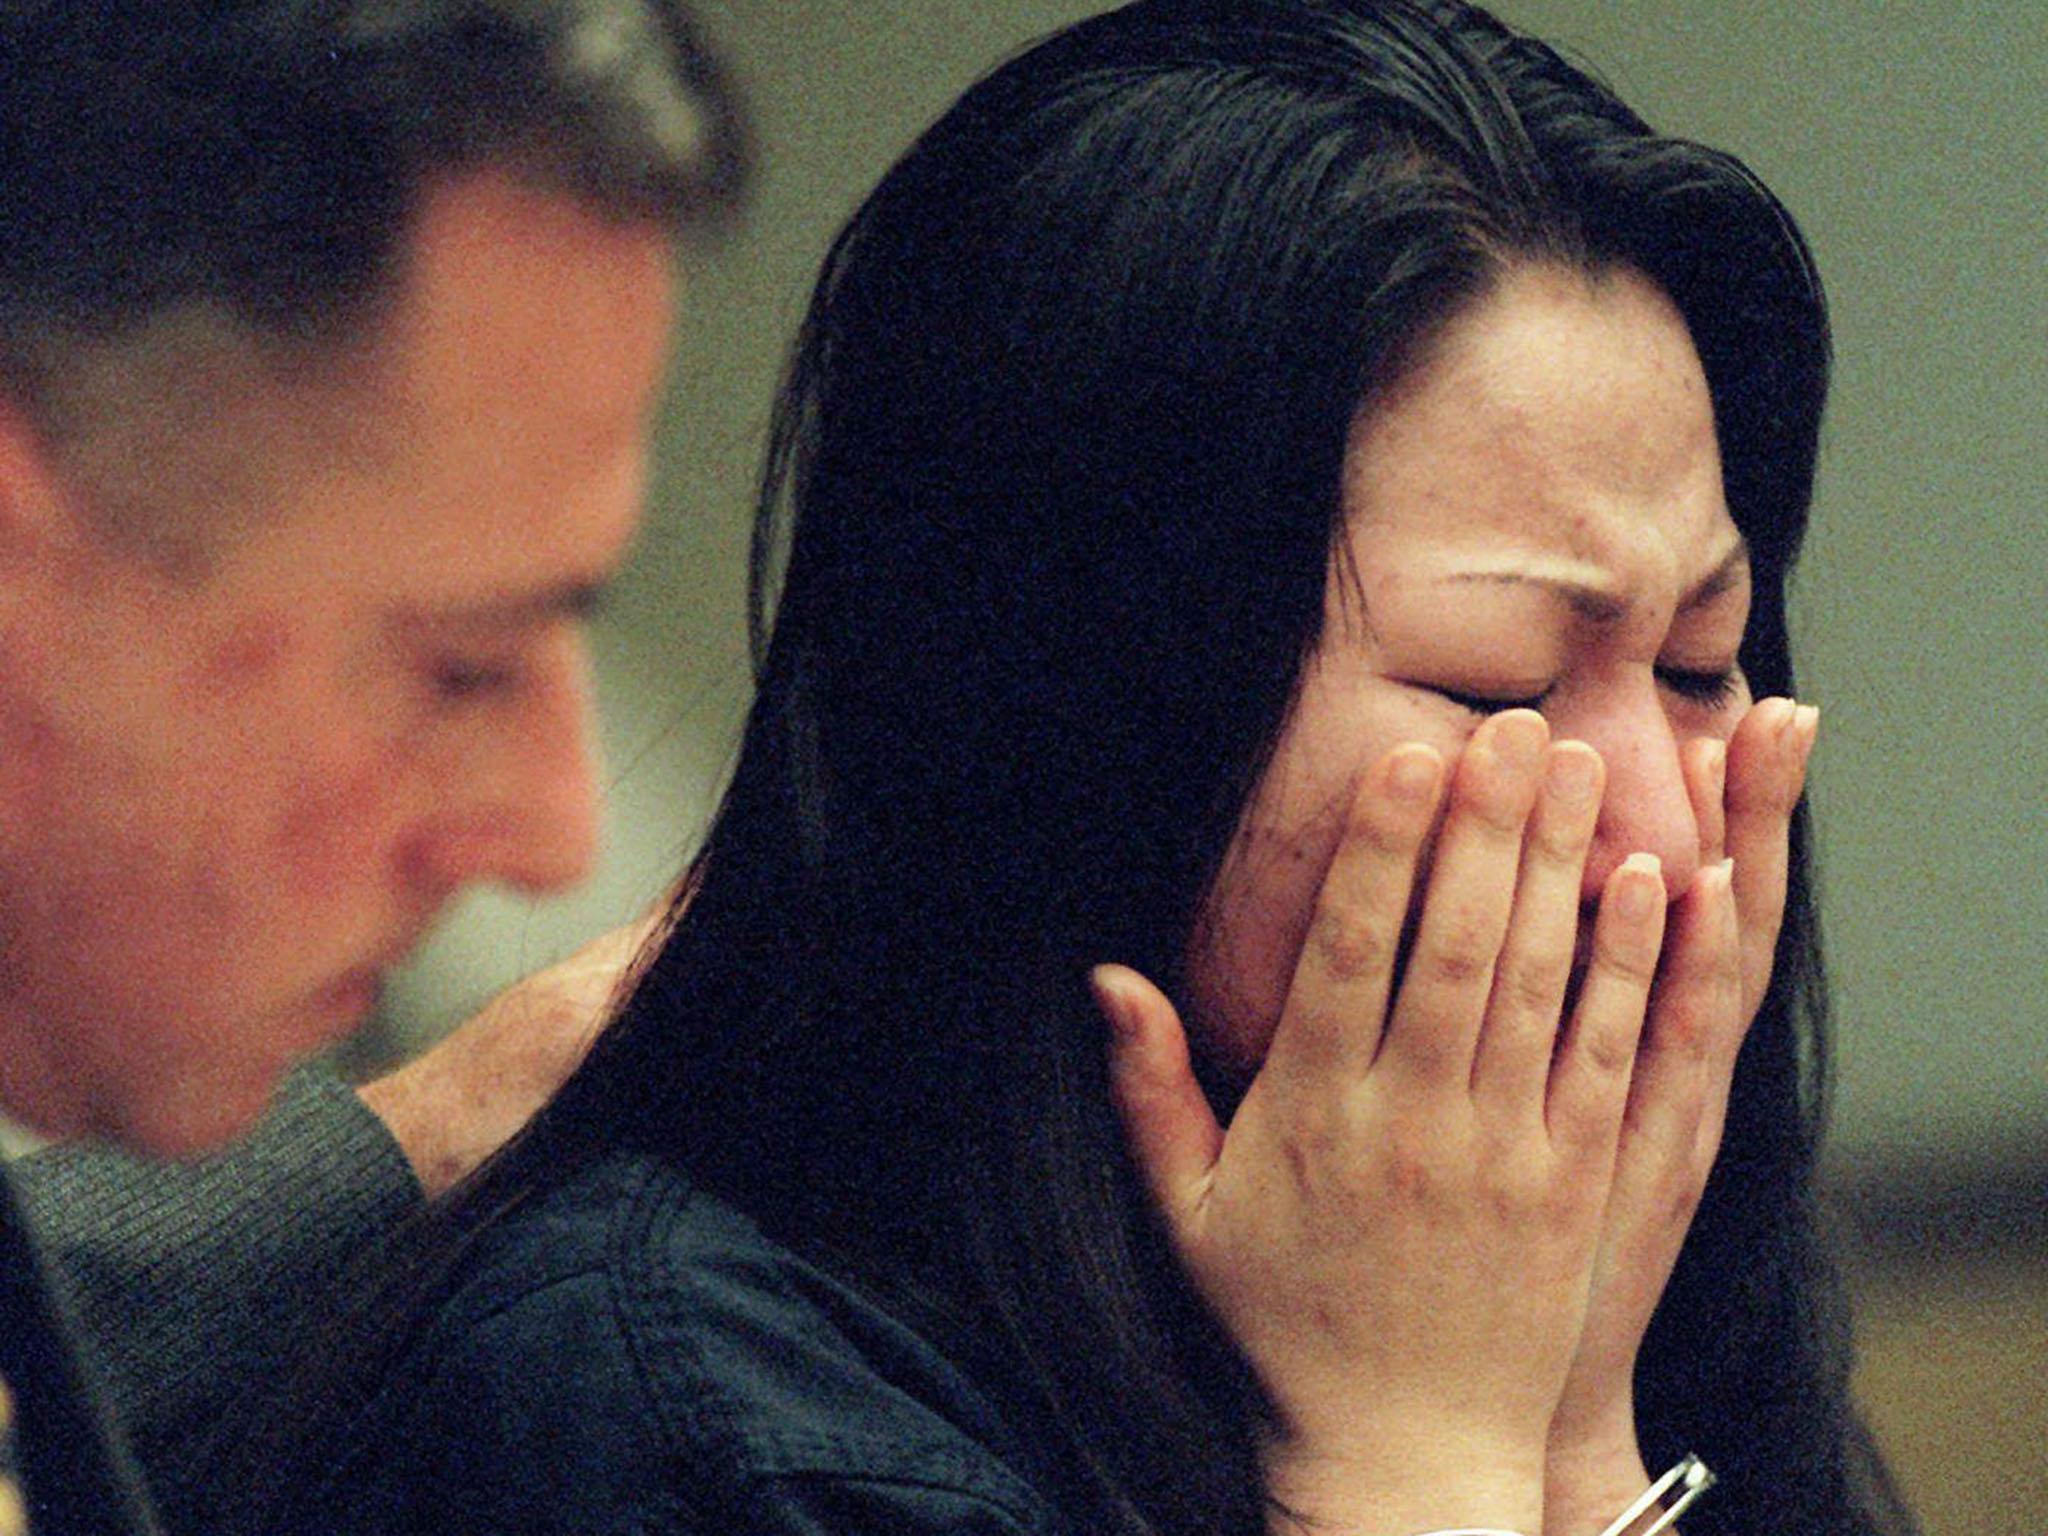 Gina Han was sentenced to 26 years to life for plotting the murder of her twin sister Sunny. Han has been granted parole after nearly two decades in prison.